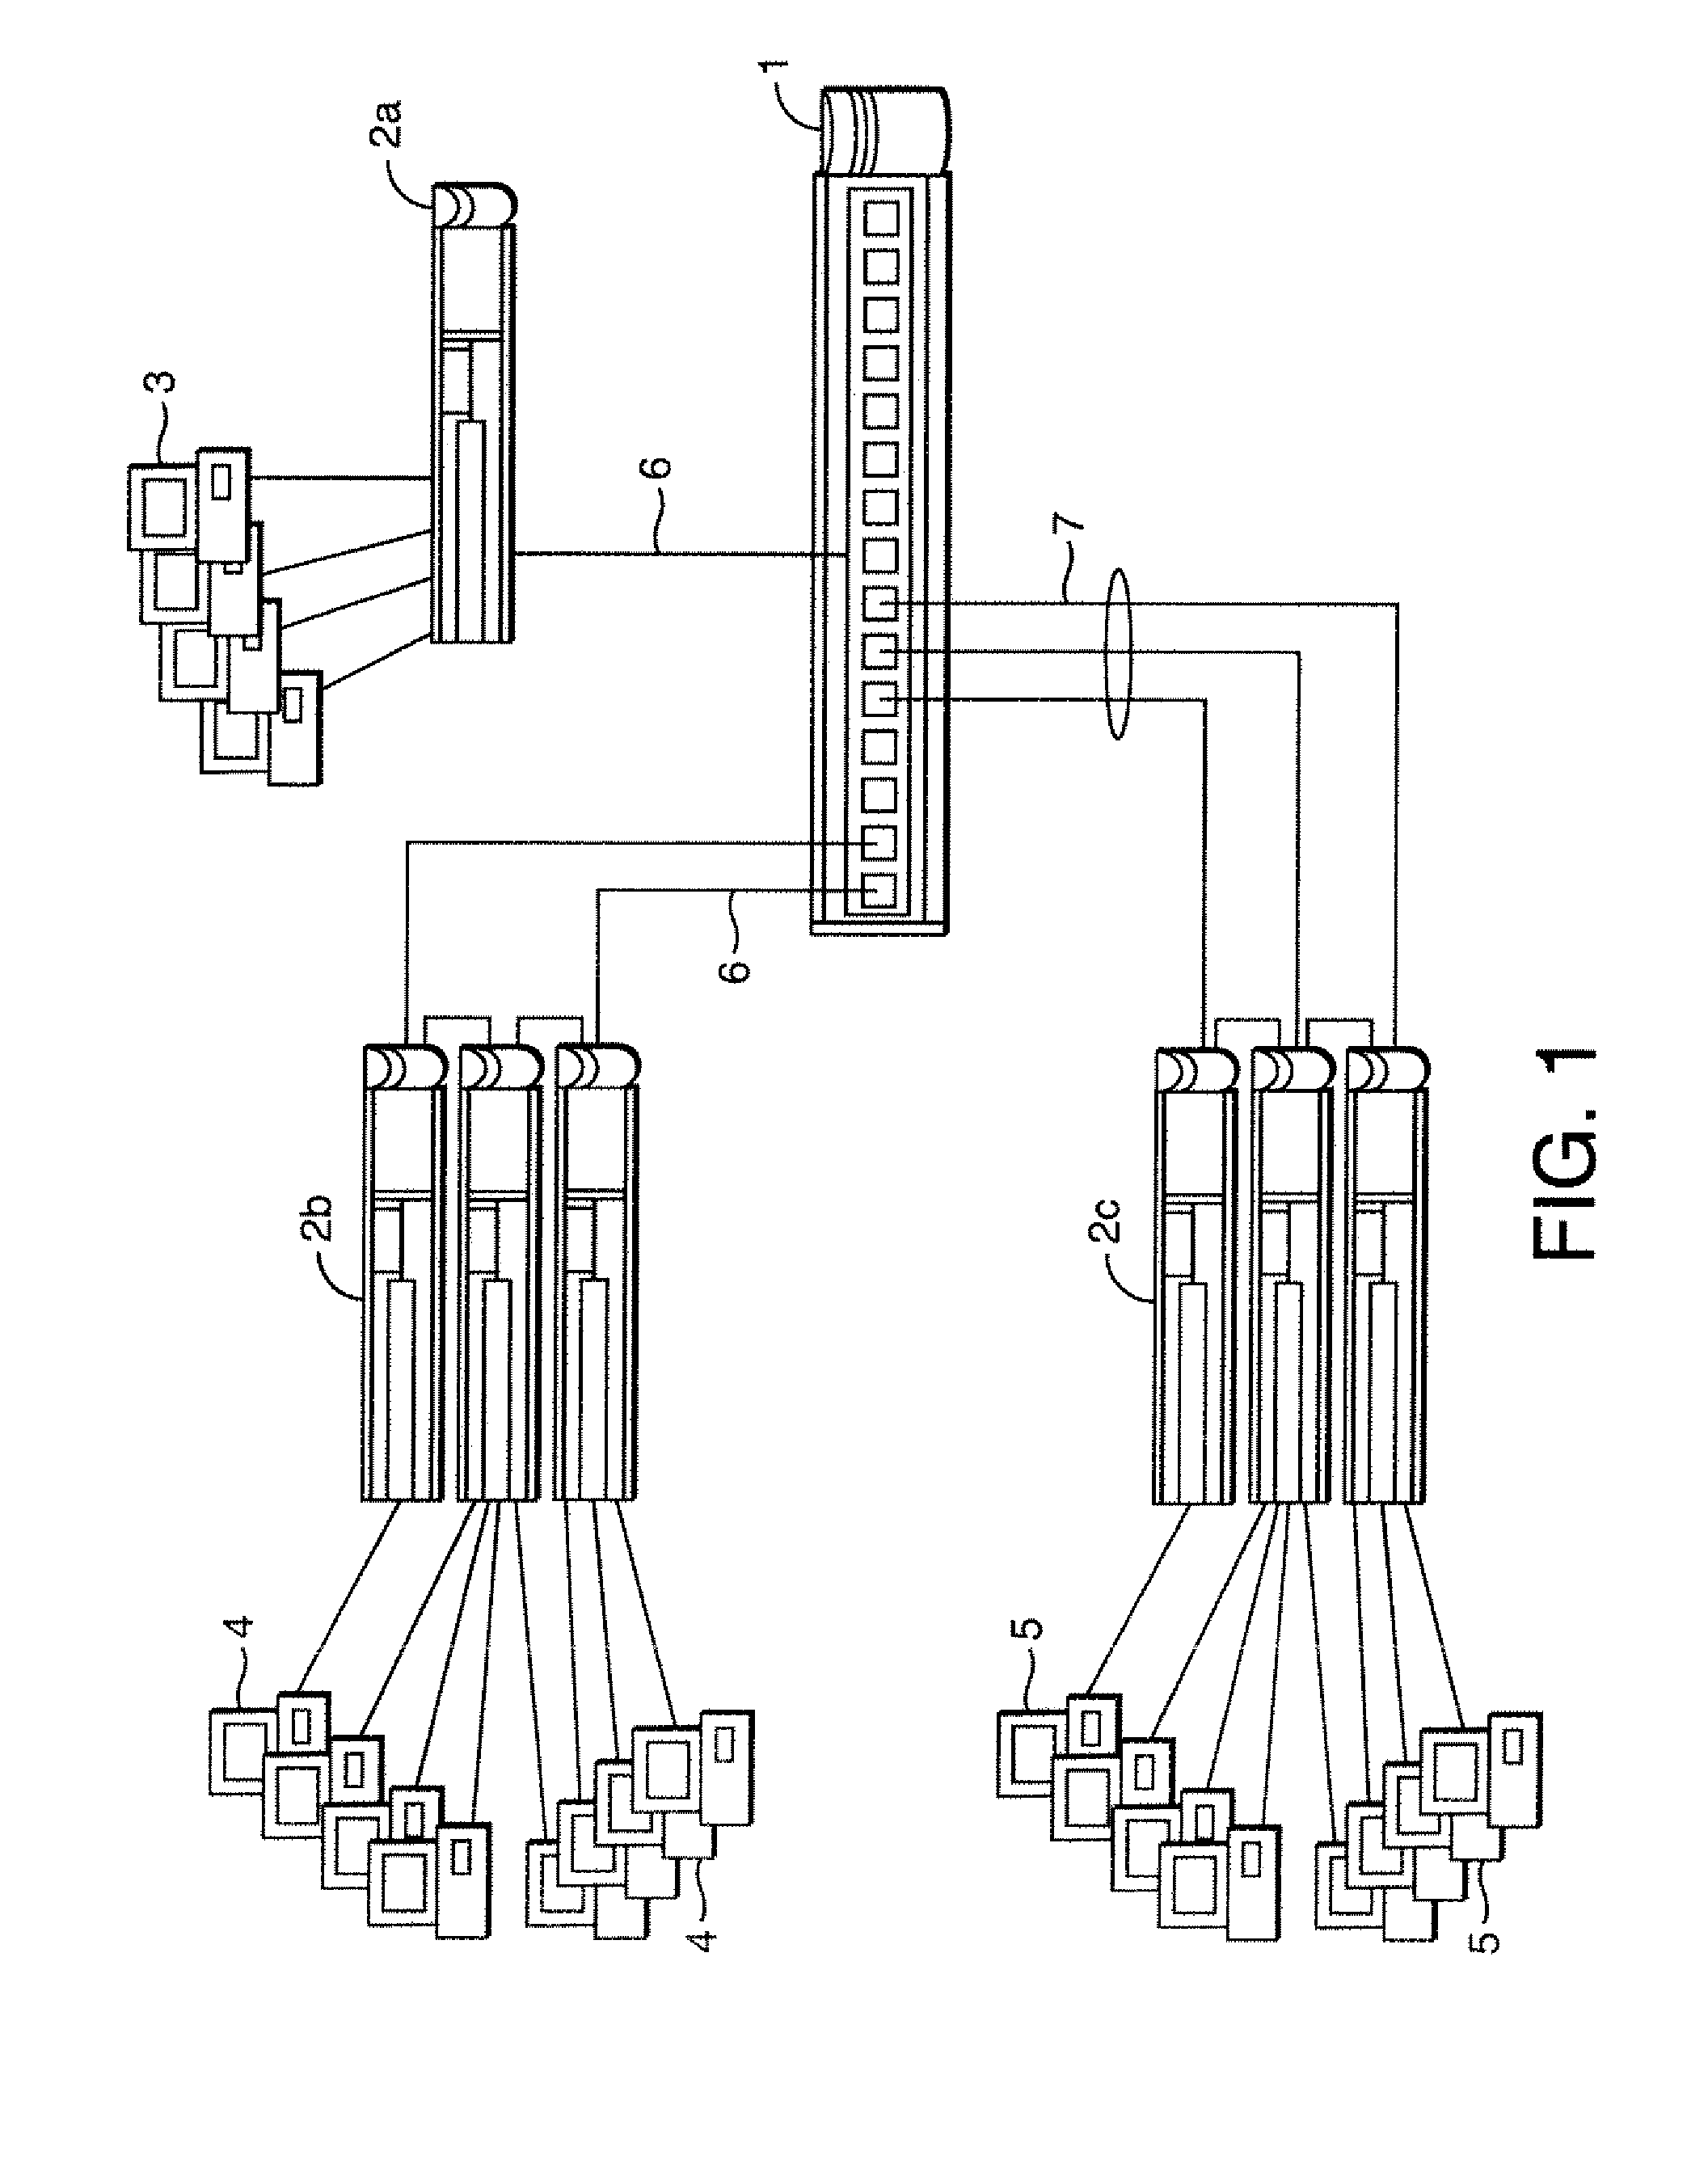 System and method for the management of power supplied over data lines